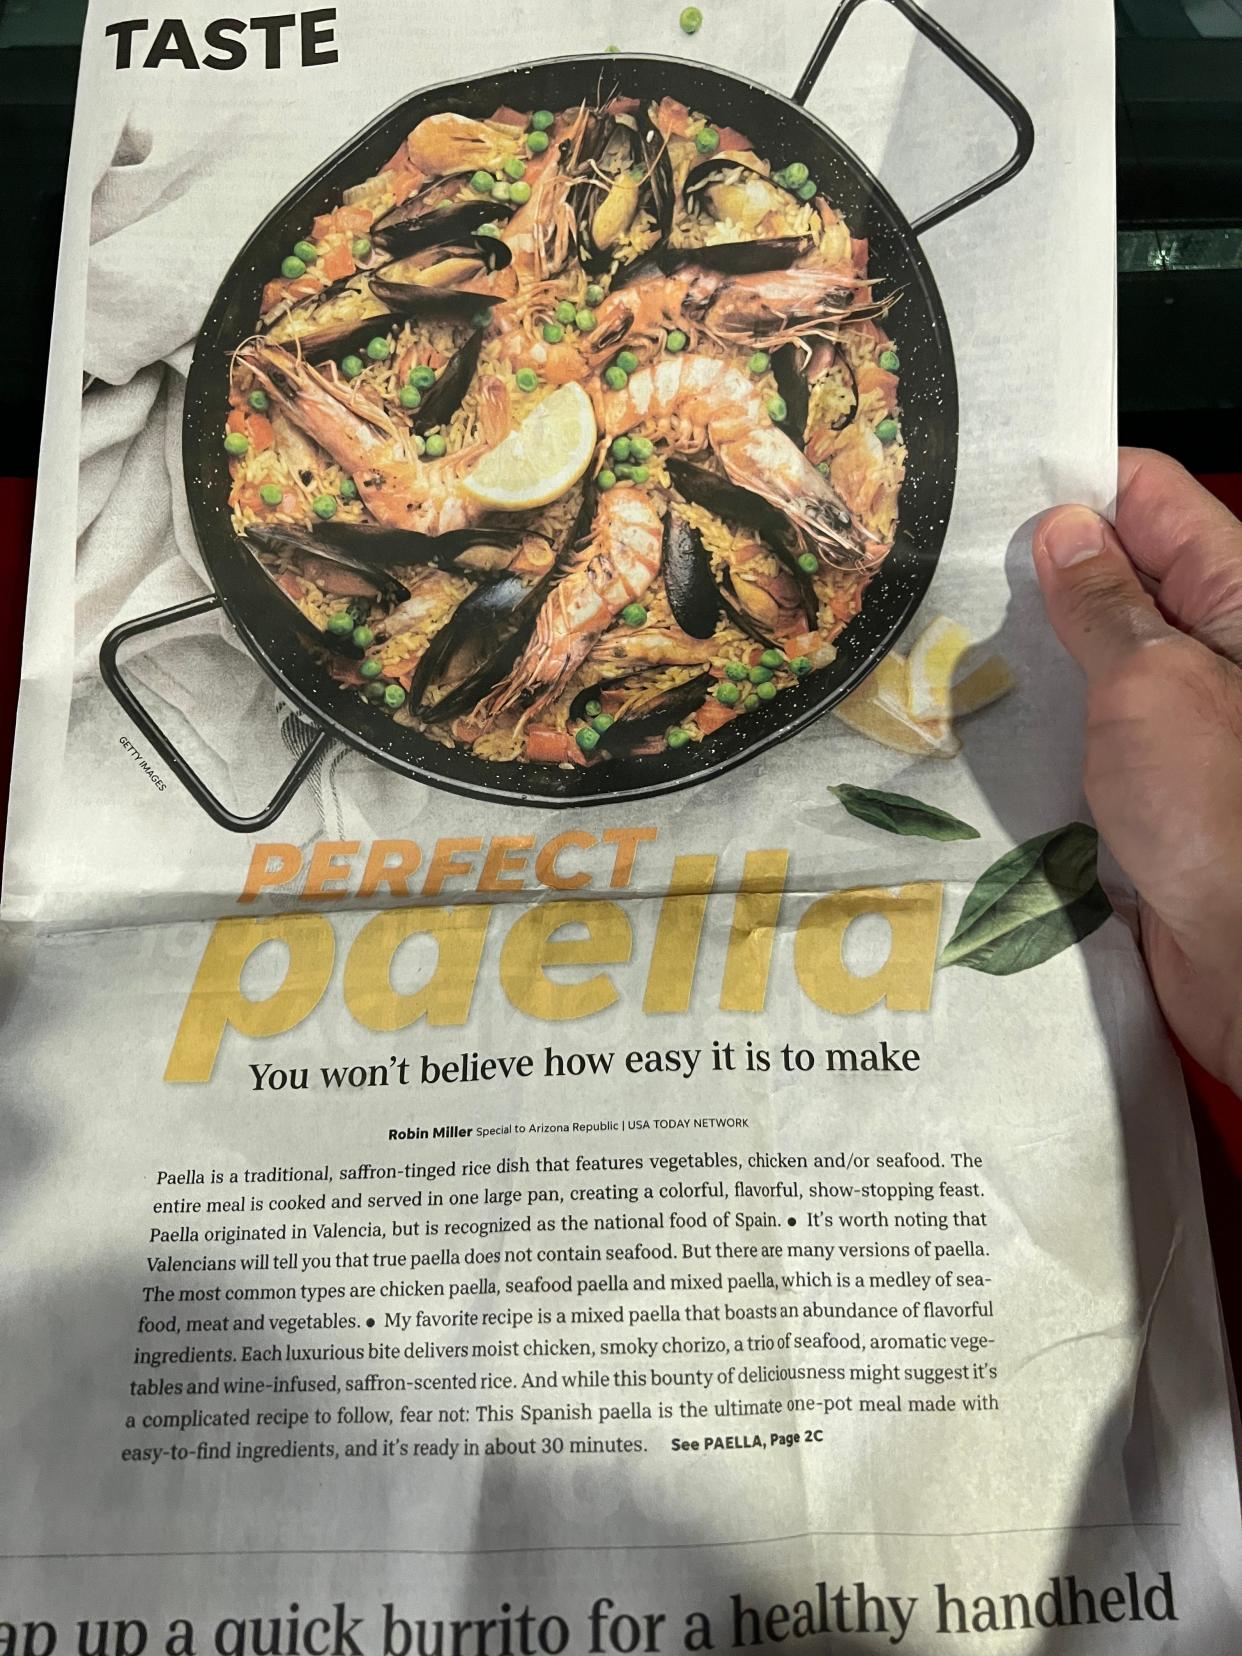 The Tennessean Opinion and Engagement Director David Plazas made from scratch from a "perfect paella" from a recipe in the newspaper on April 24, 2024.